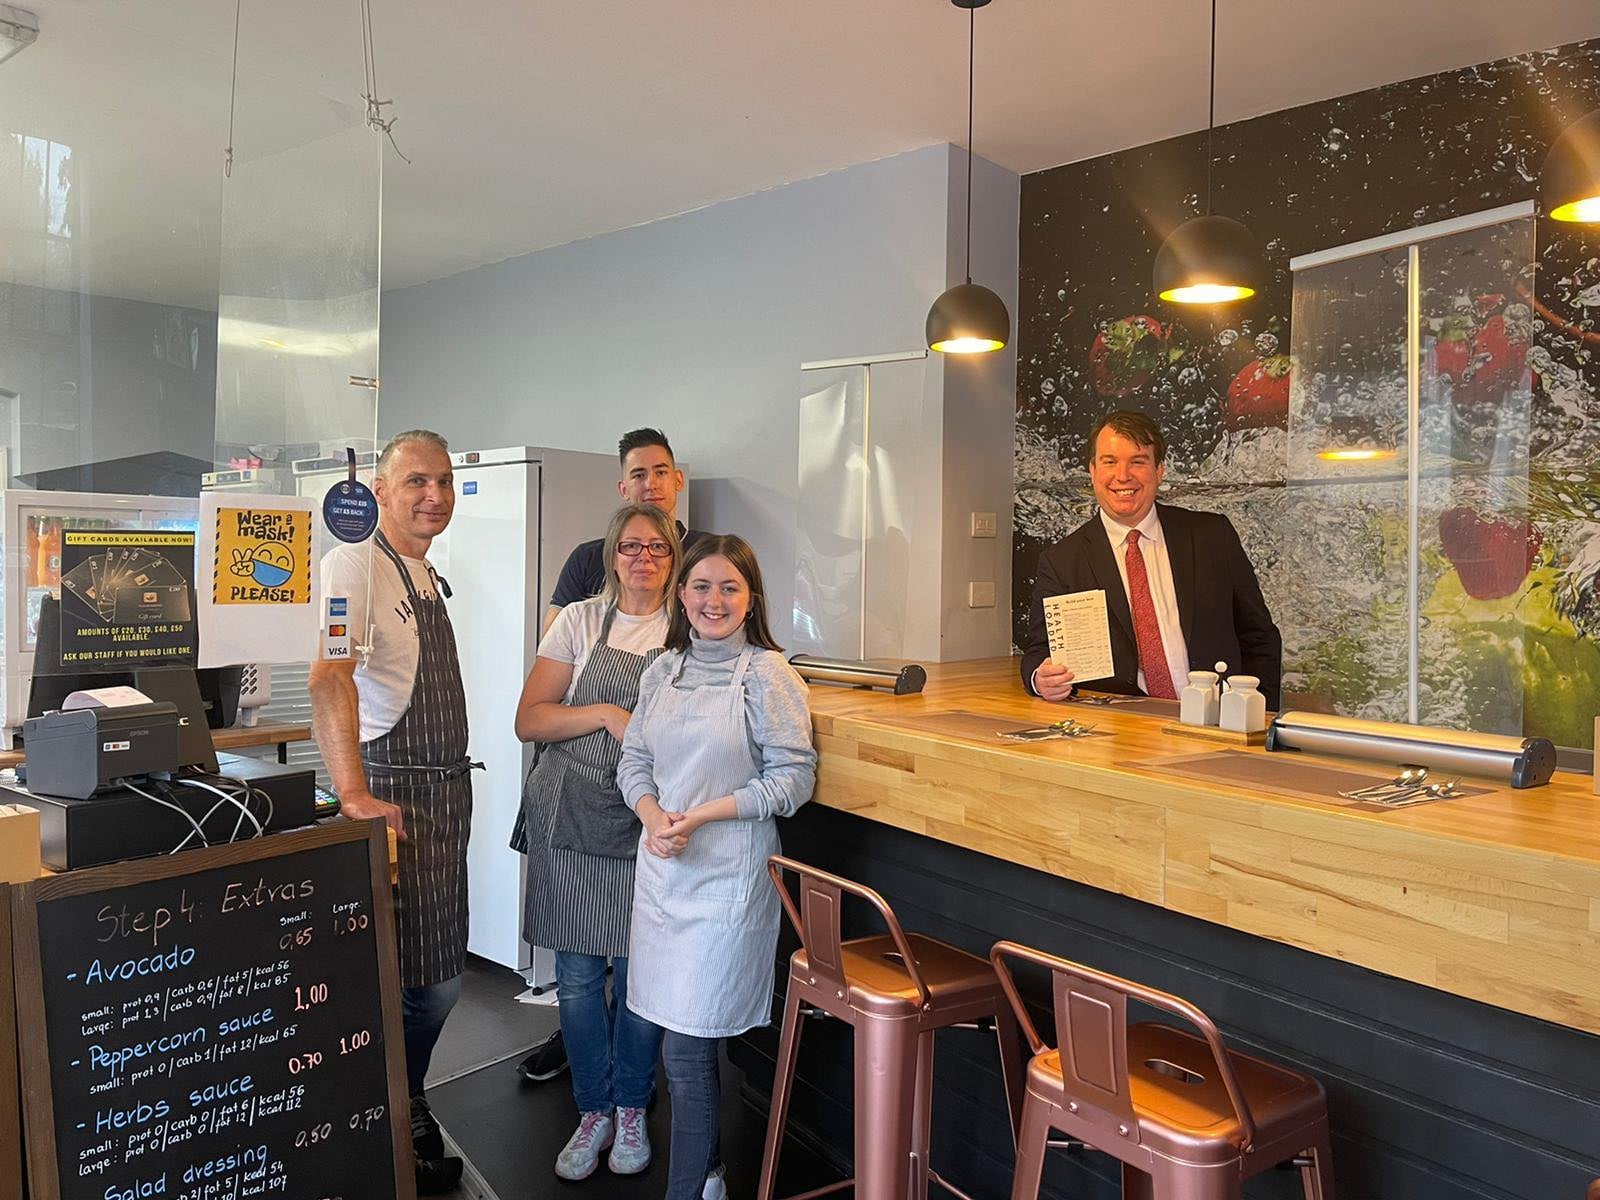 Craig with Slawomir, Jake, Sylwia and Carla from the newly opened Health Loaded in Newtown, which offers a variety of healthy meals which cater for everyone. The Andalusian Chicken looked and smelt fantastic!